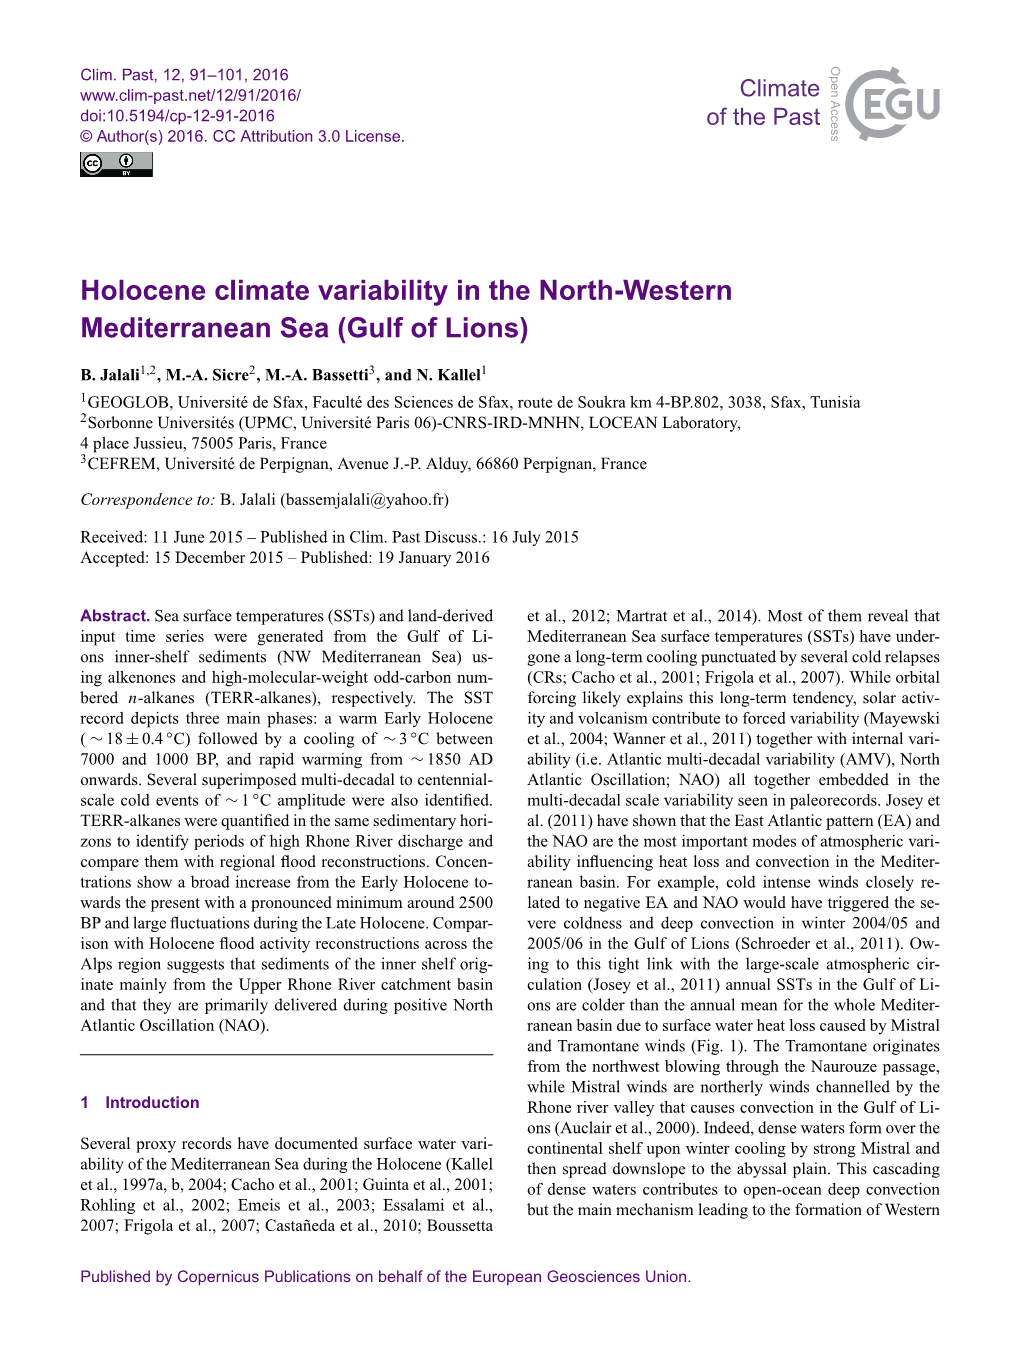 Holocene Climate Variability in the North-Western Mediterranean Sea (Gulf of Lions)